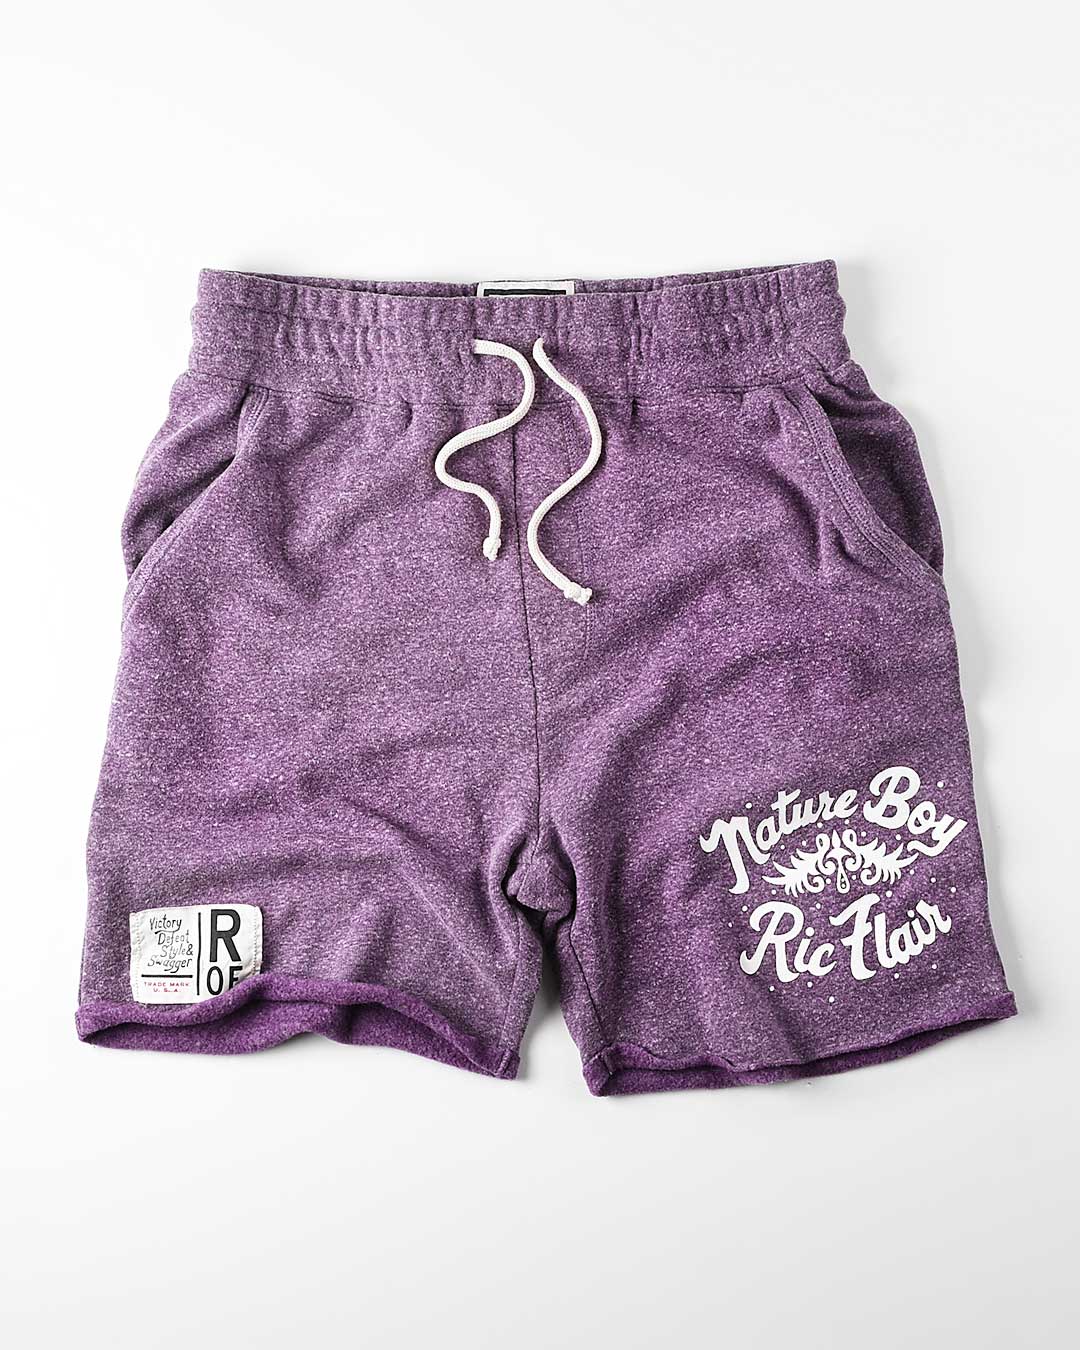 Ric Flair Nature Boy Purple Shorts - Roots of Fight